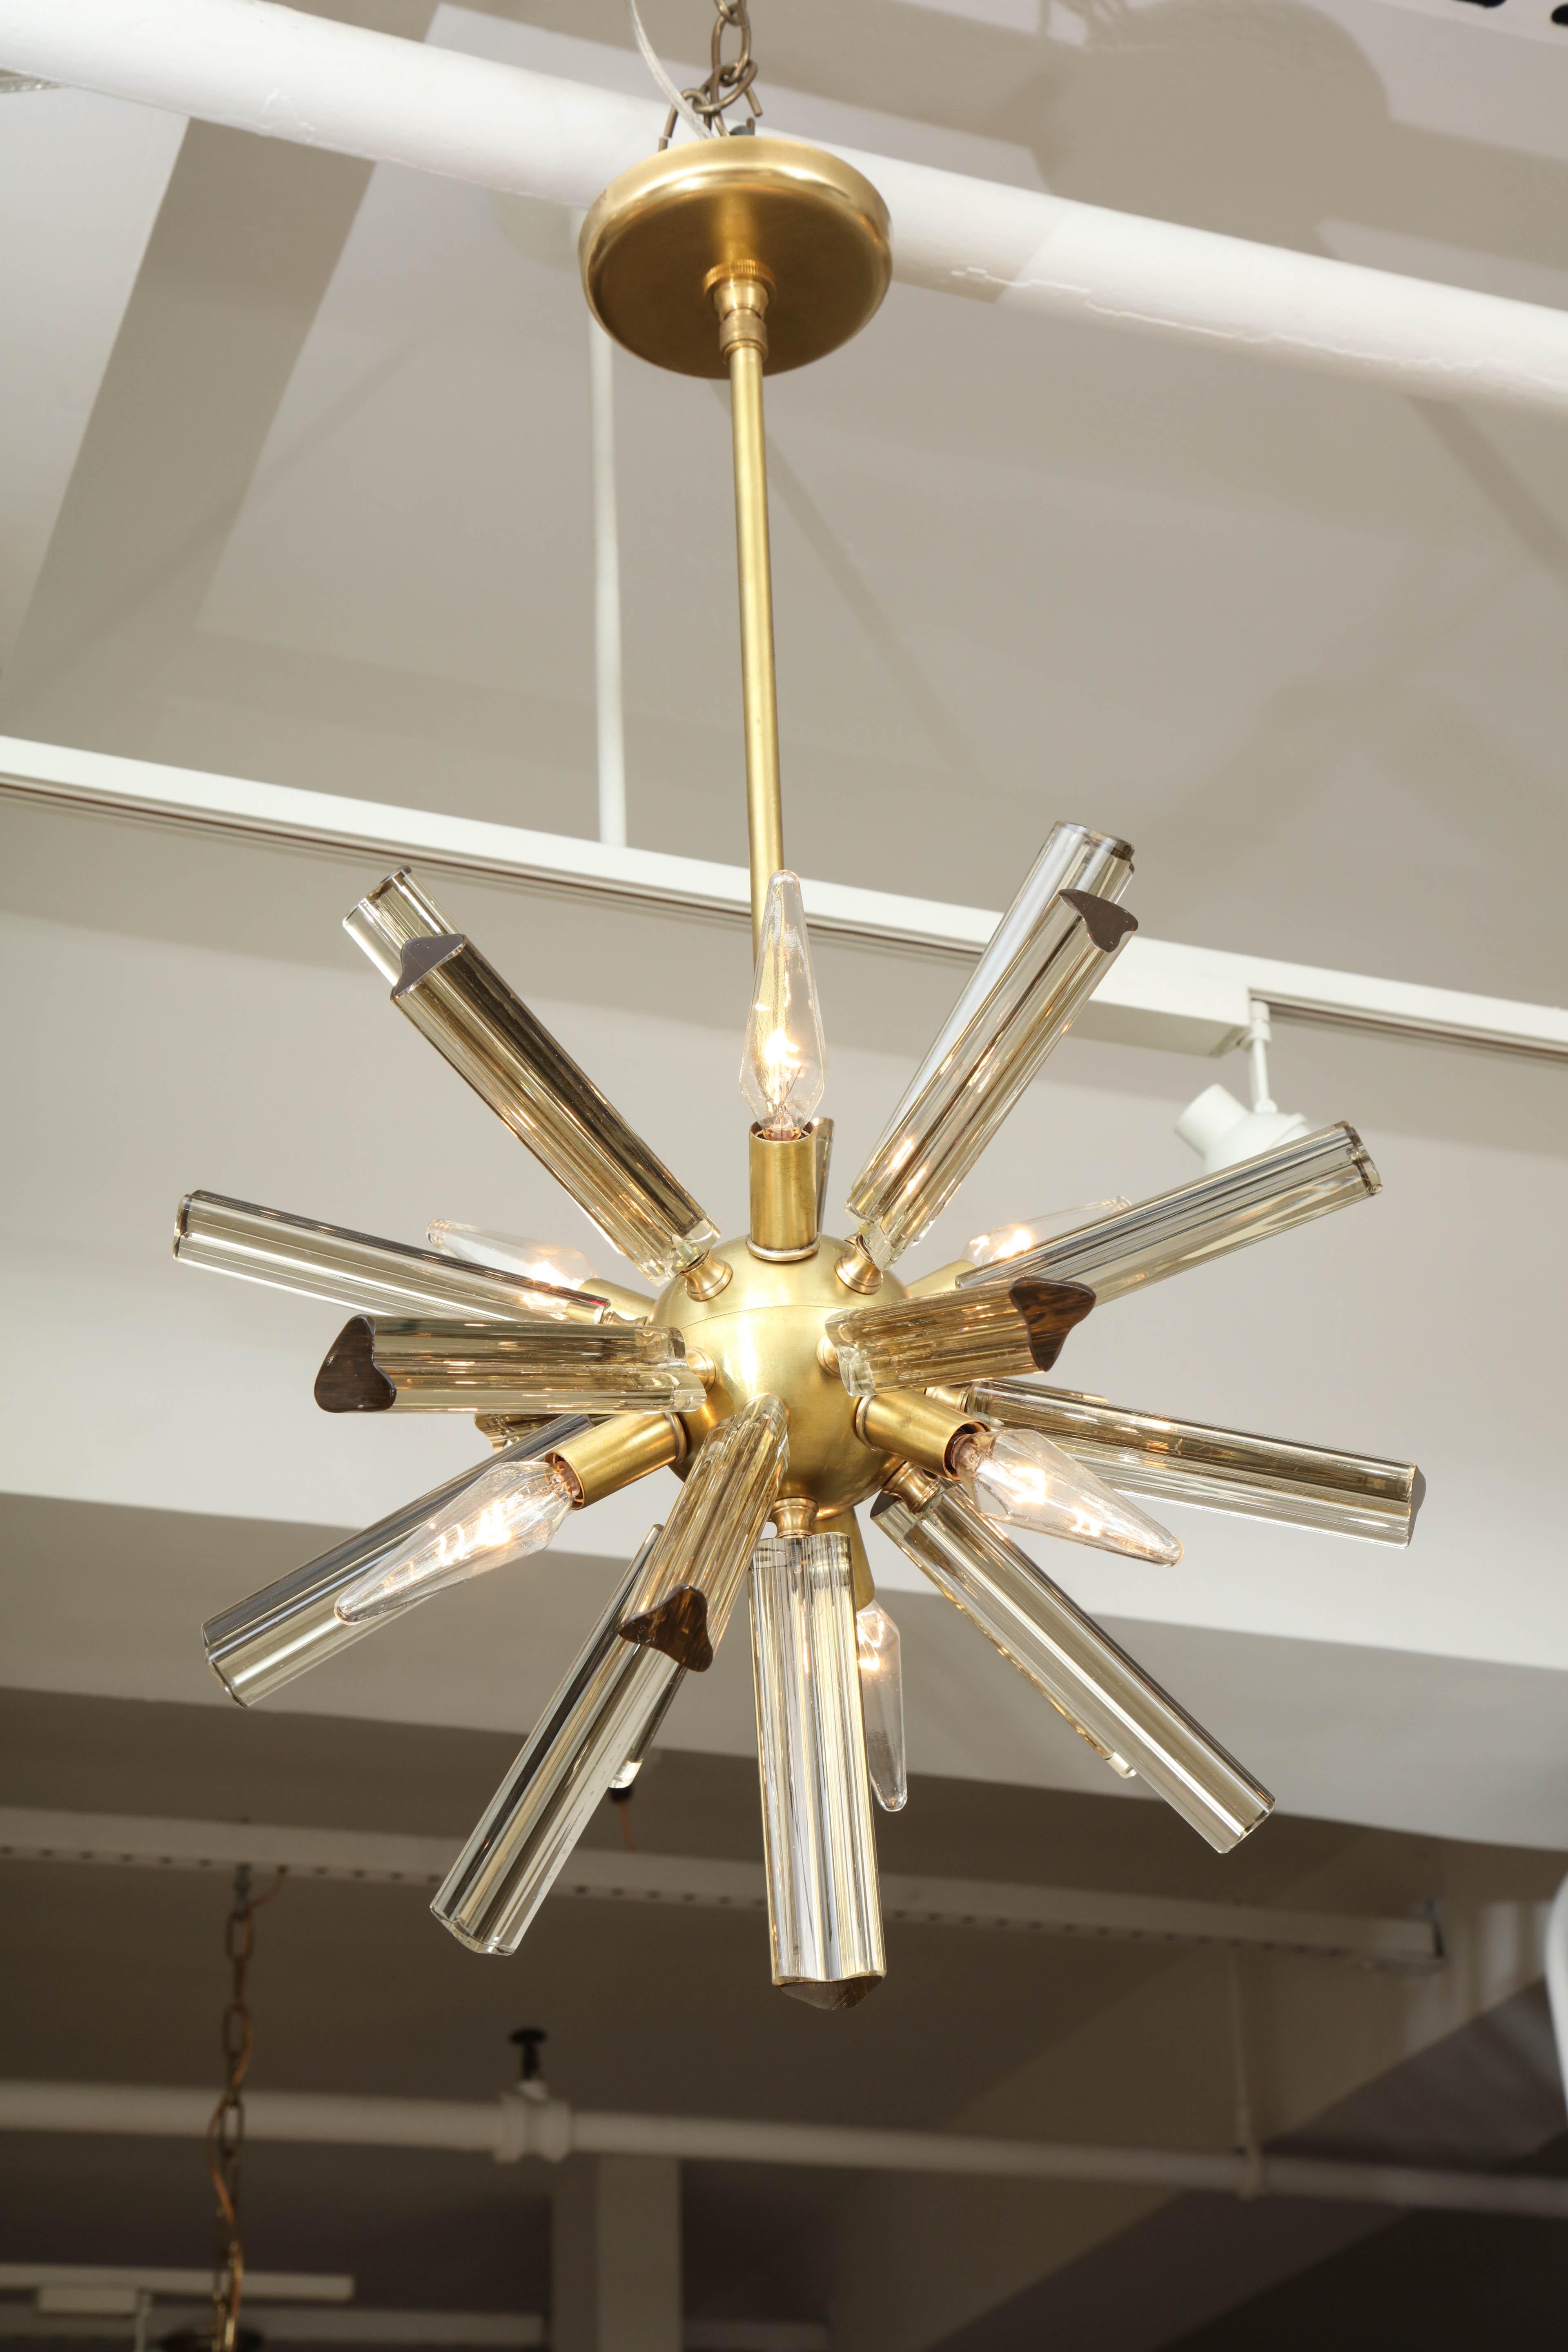 A glamorous little Italian sputnik chandelier with clear and amber triedri crystals surrounding a brass globe. Perfect for adding a bit of drama to a small space.